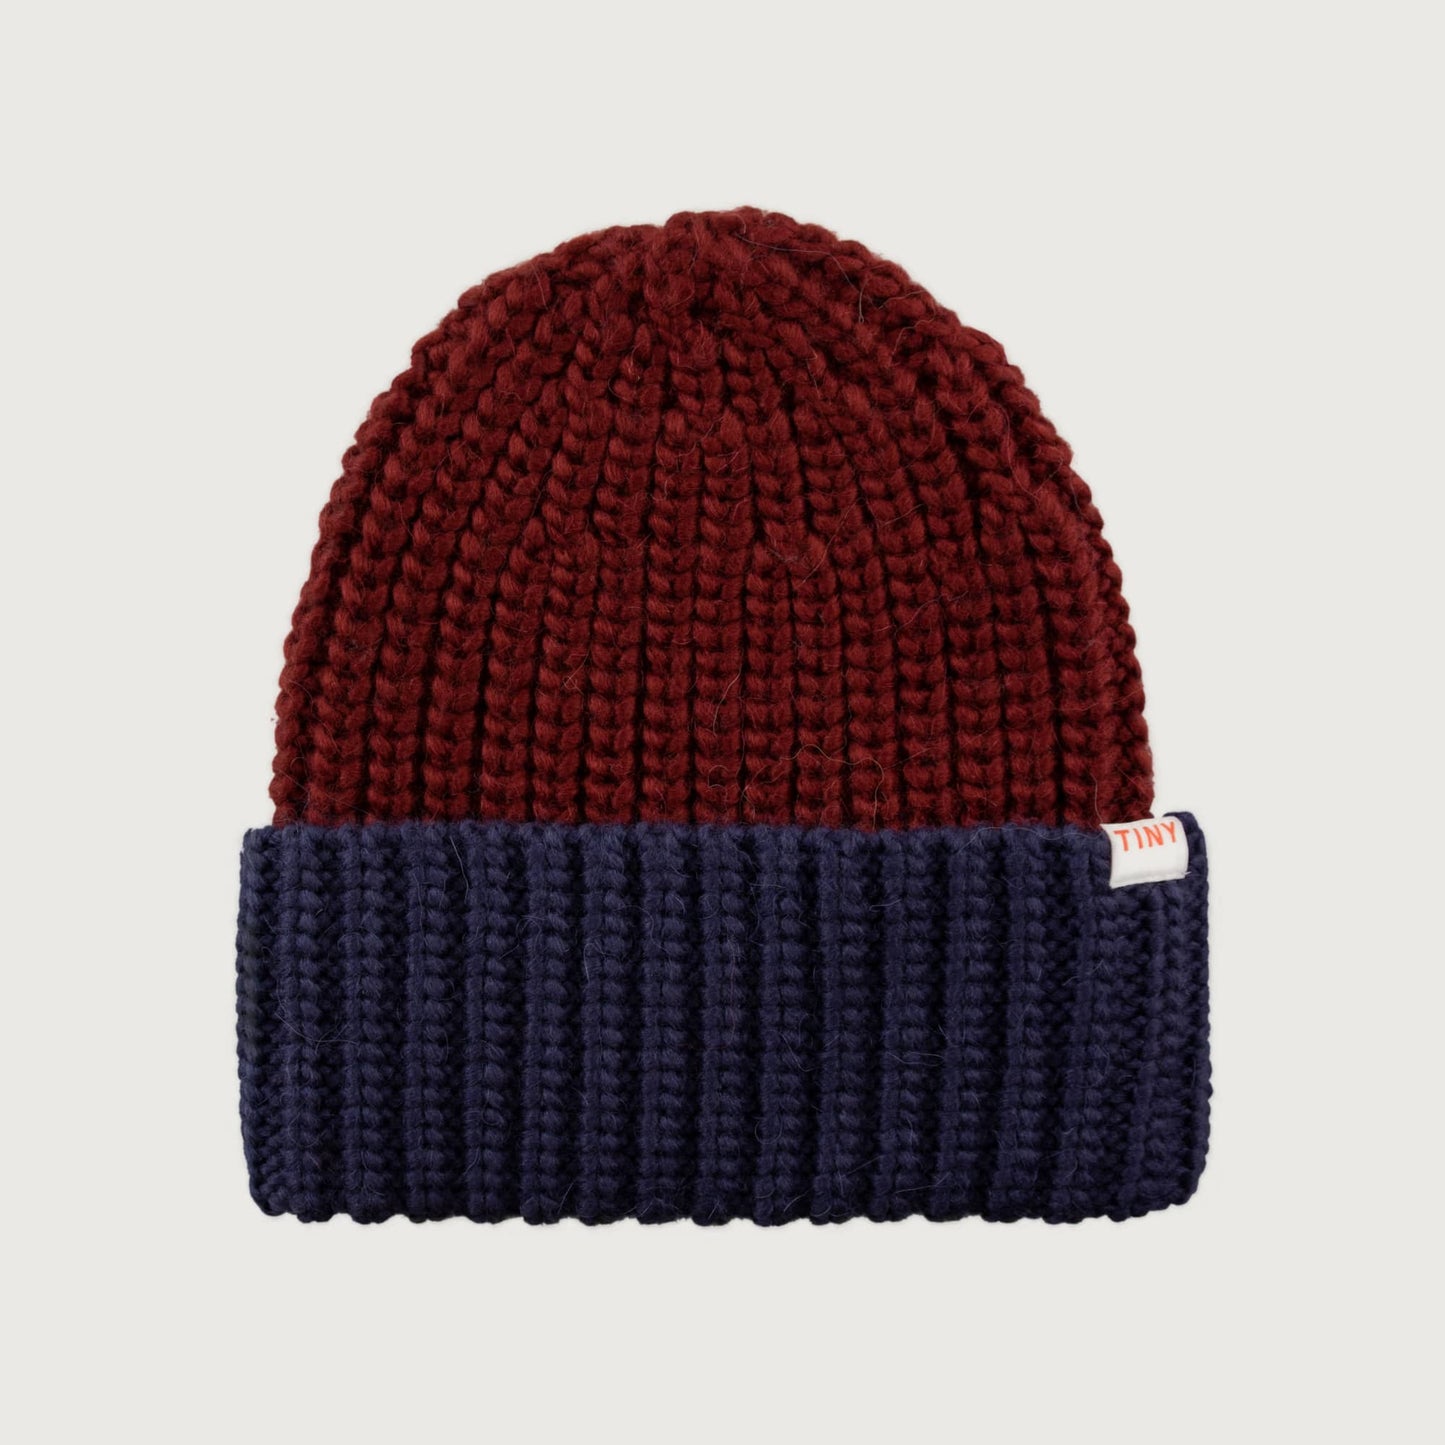 Tinycottons COLOR BLOCK beanie maroon/navy